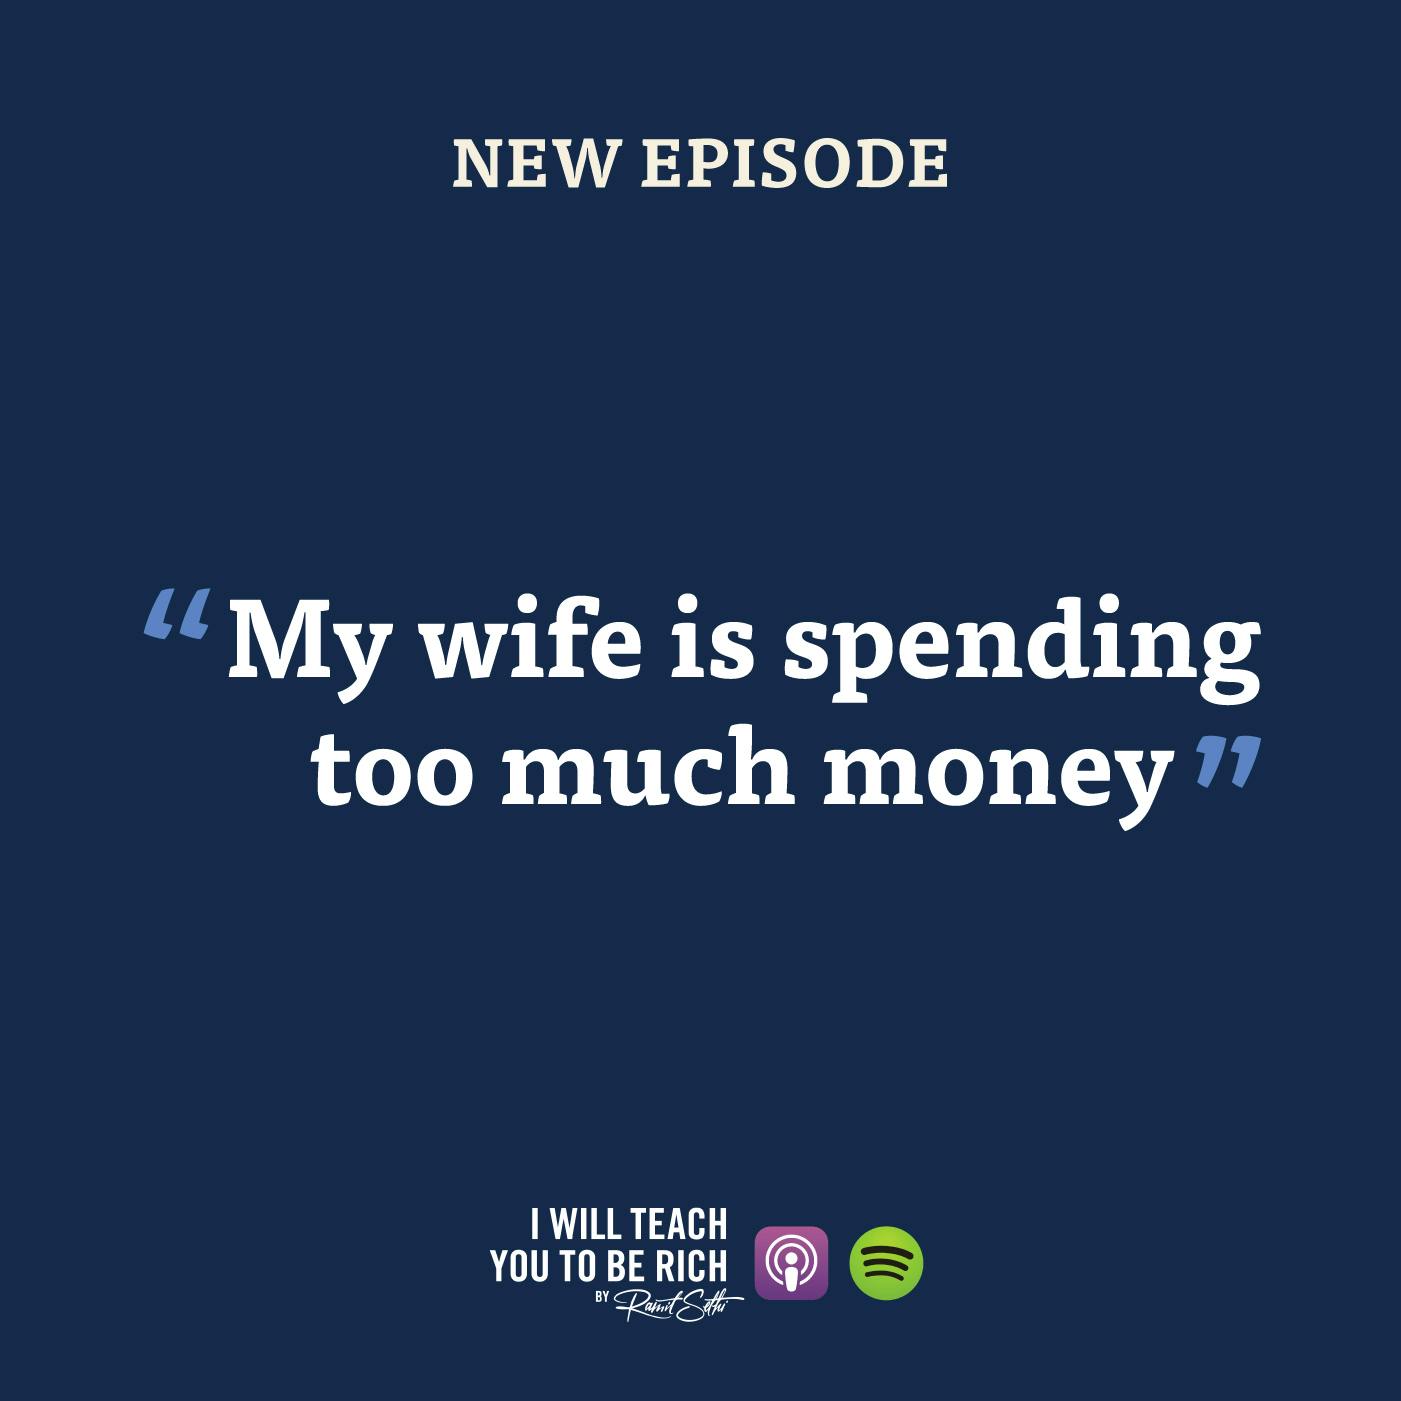 8. “My wife is spending too much money”